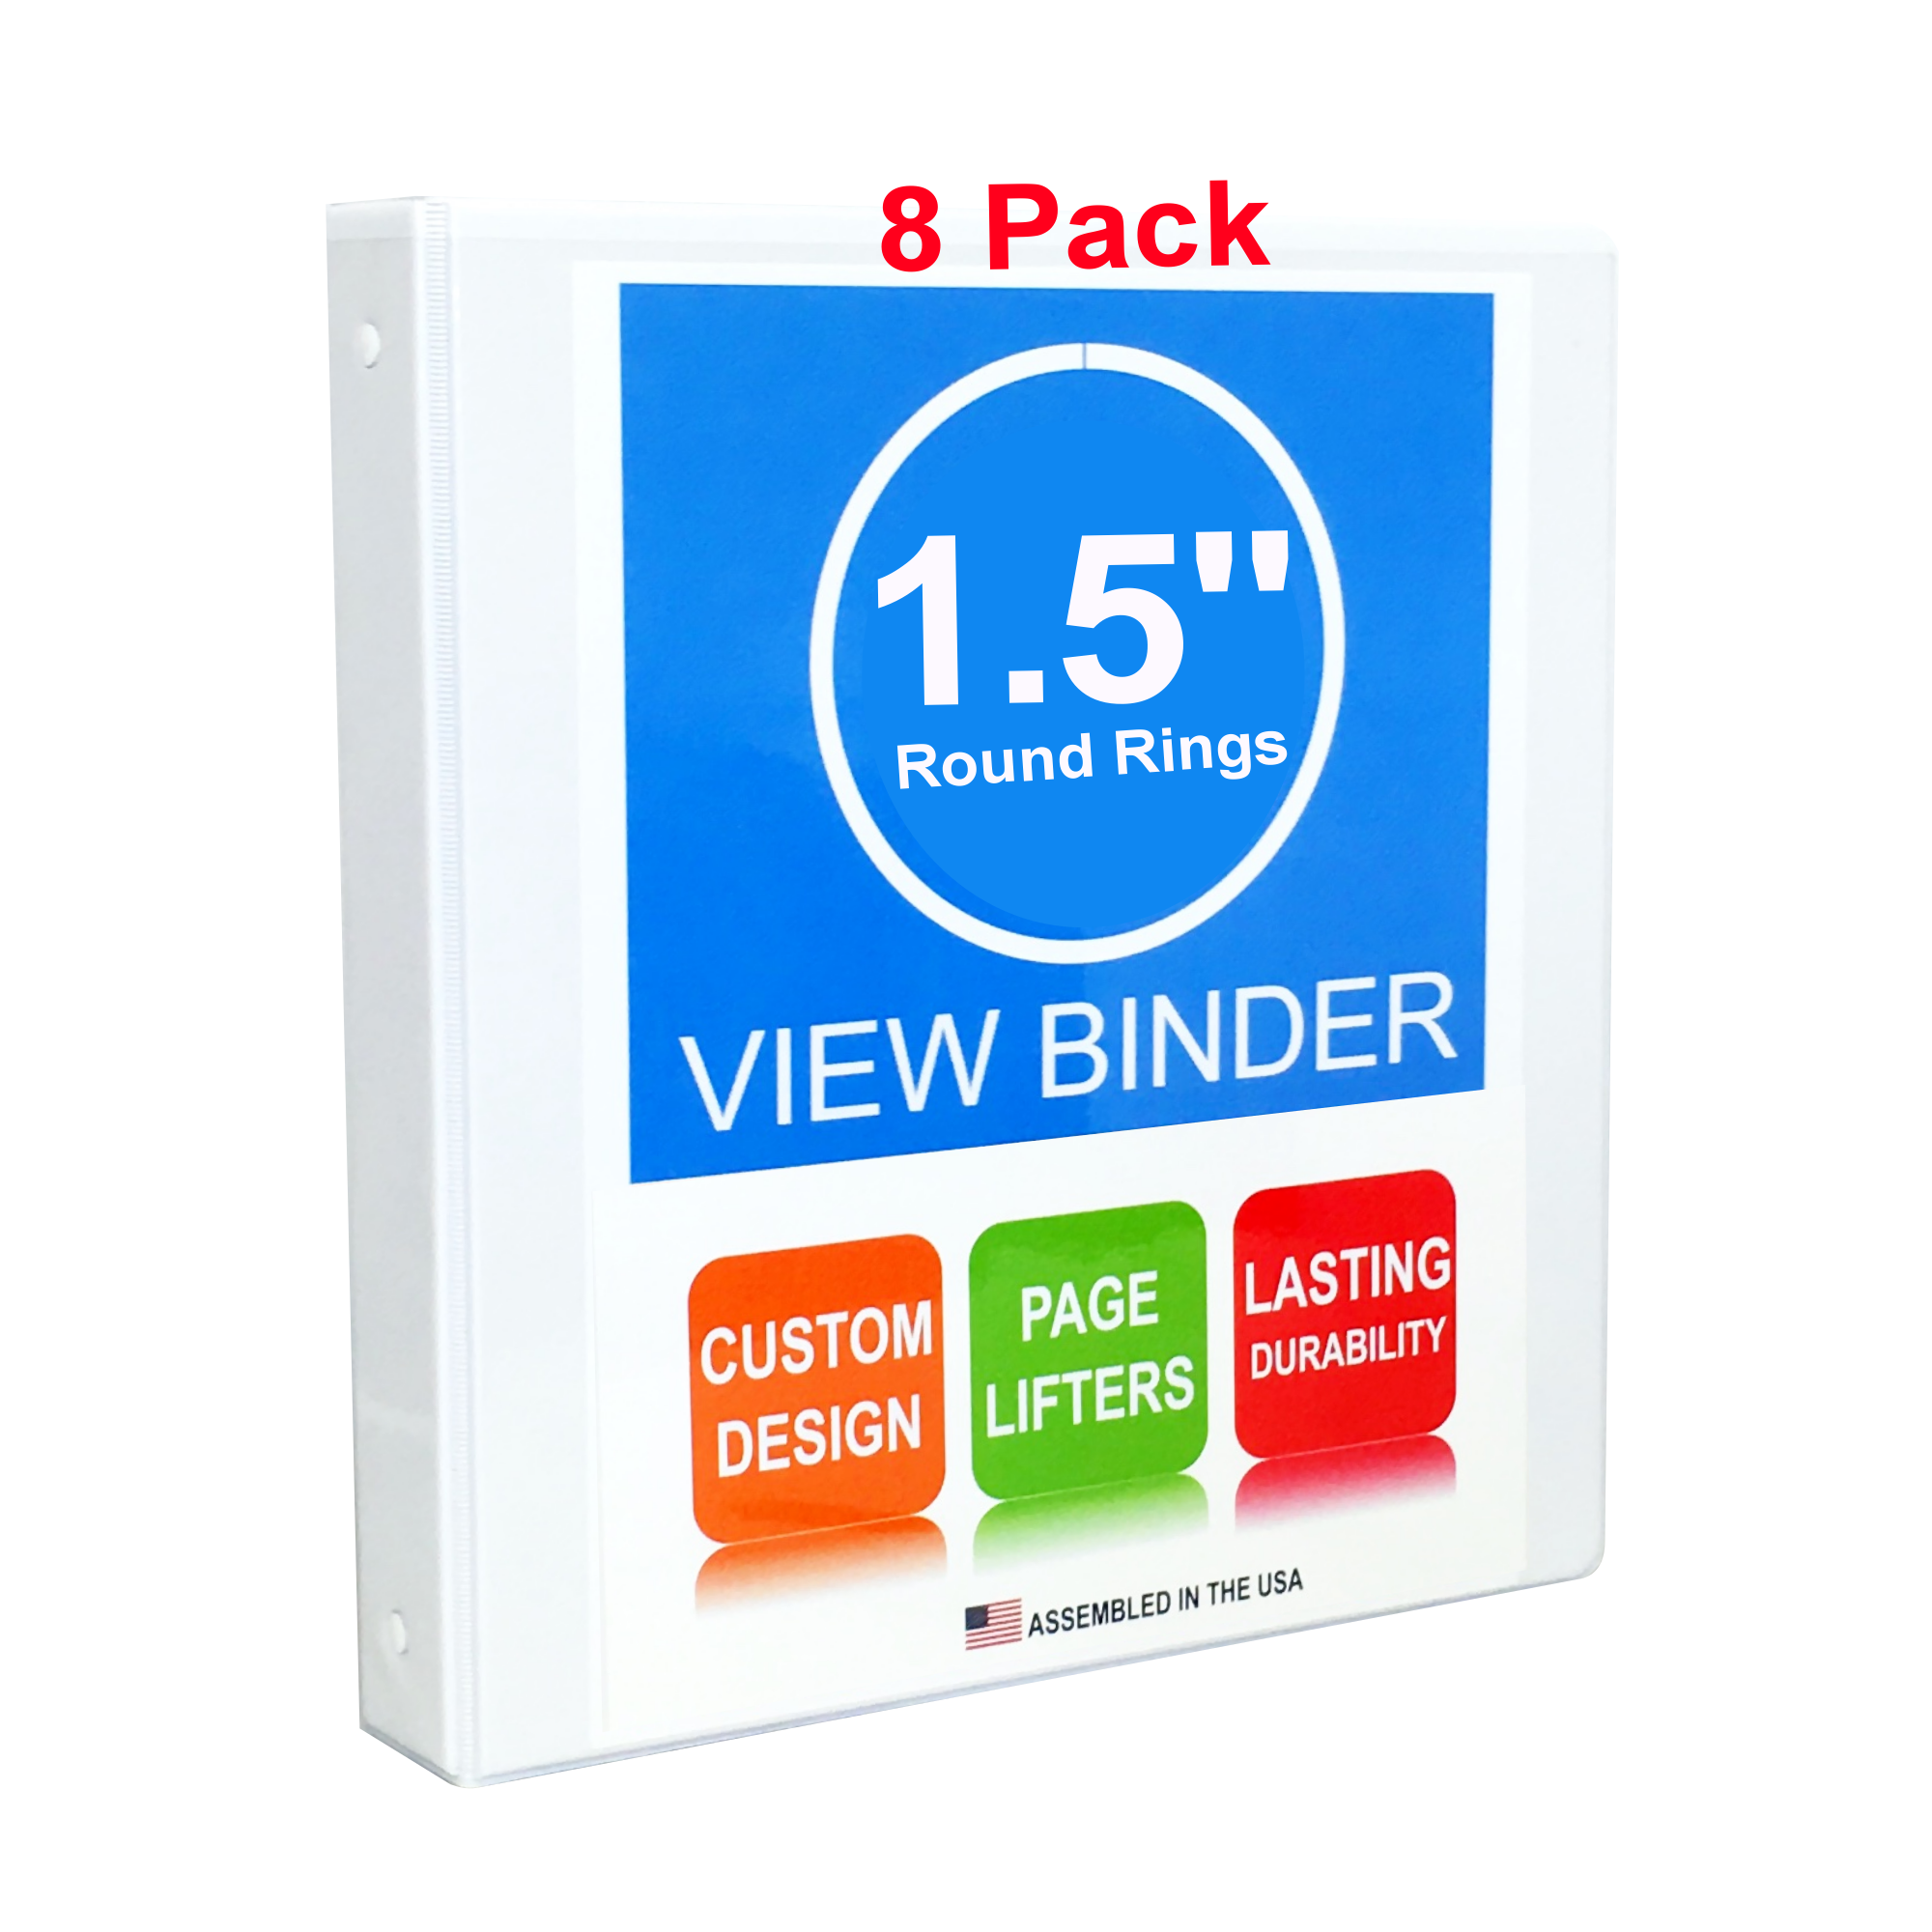 3 Ring Binder, 1.5 Inch, Round Rings, White, Clear View, Pockets, 8 Pack - RingBinderDepot.com